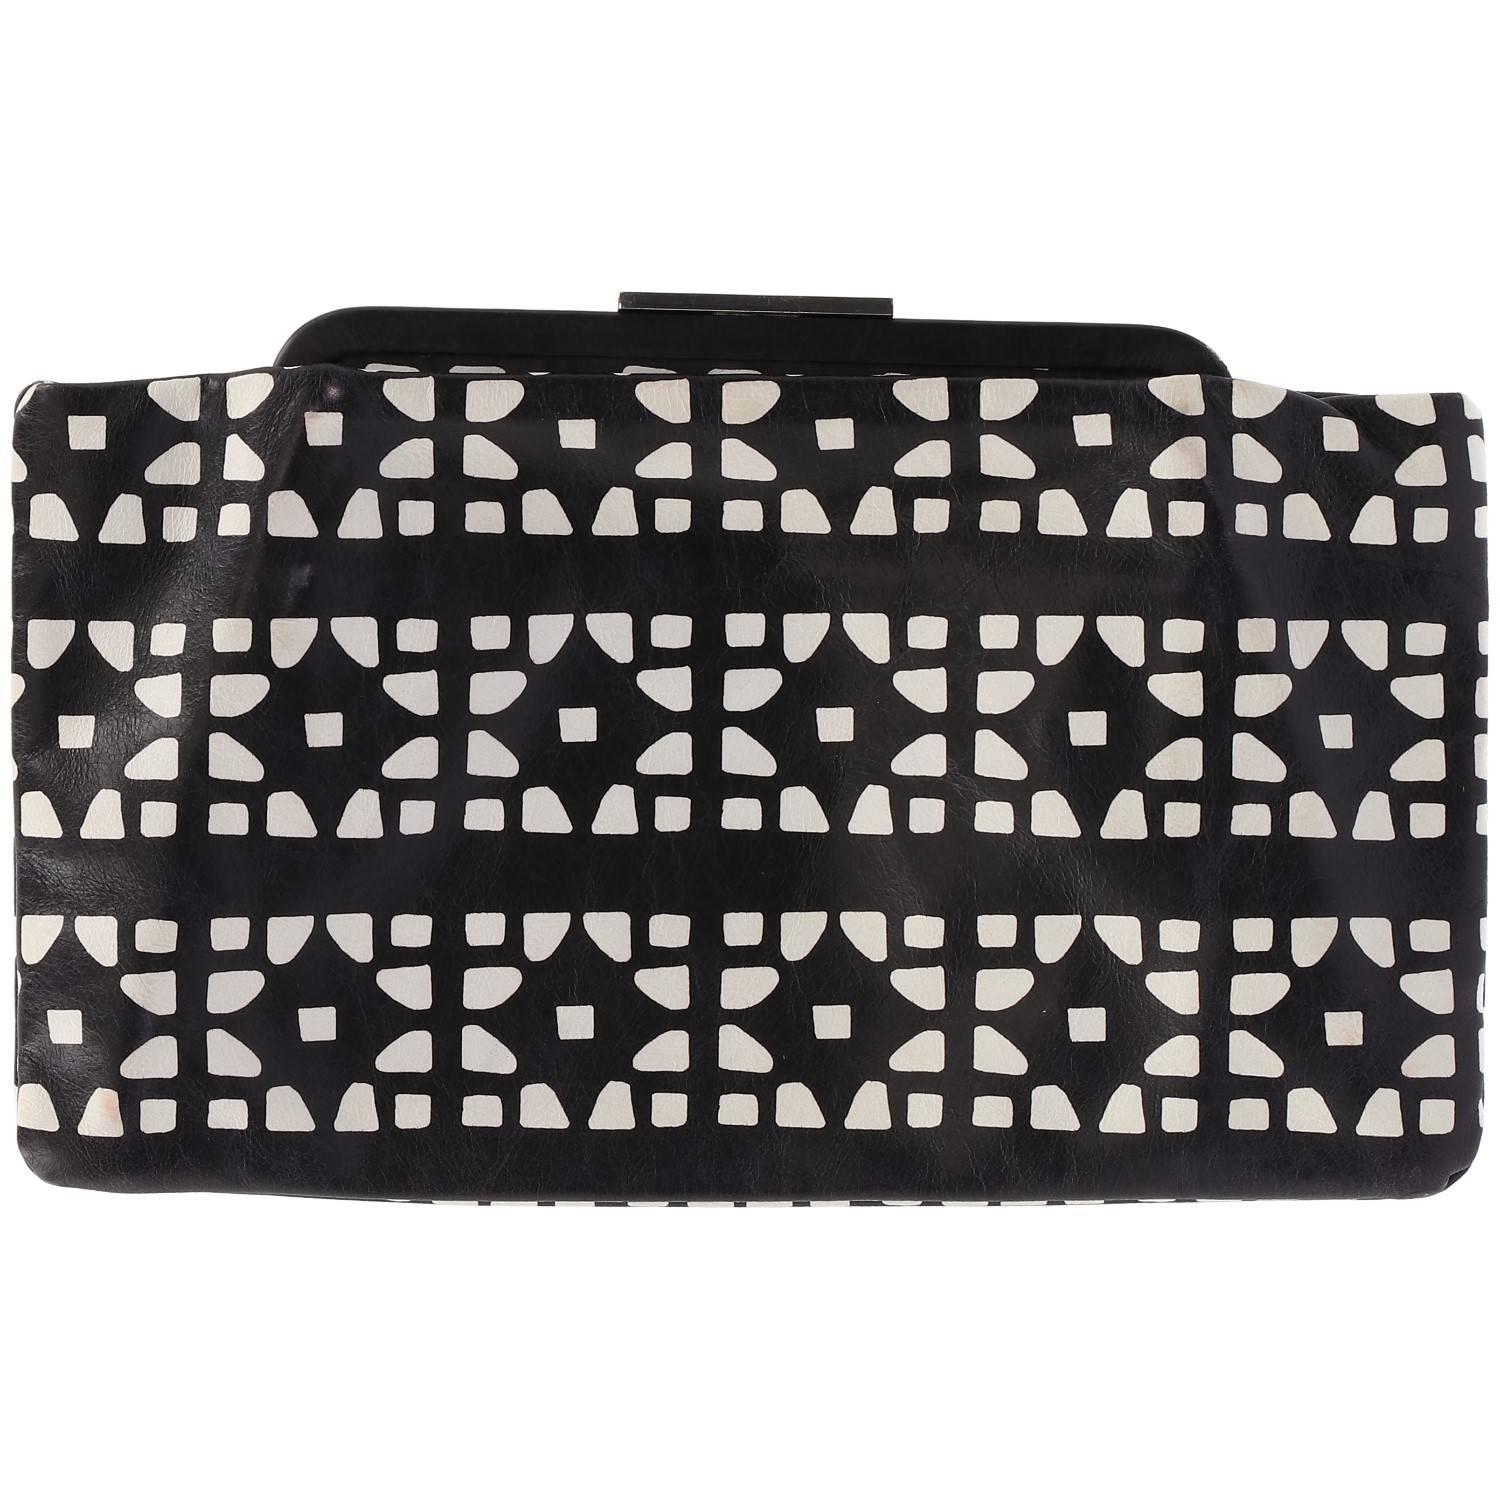 Marni black soft leather pochette with a white fun geometric pattern. Lined, with two internal pockets. The item is in good conditions, it only show some scratches on the metallic fastening and some light spots (see the pictures). 
Height: 19 cm